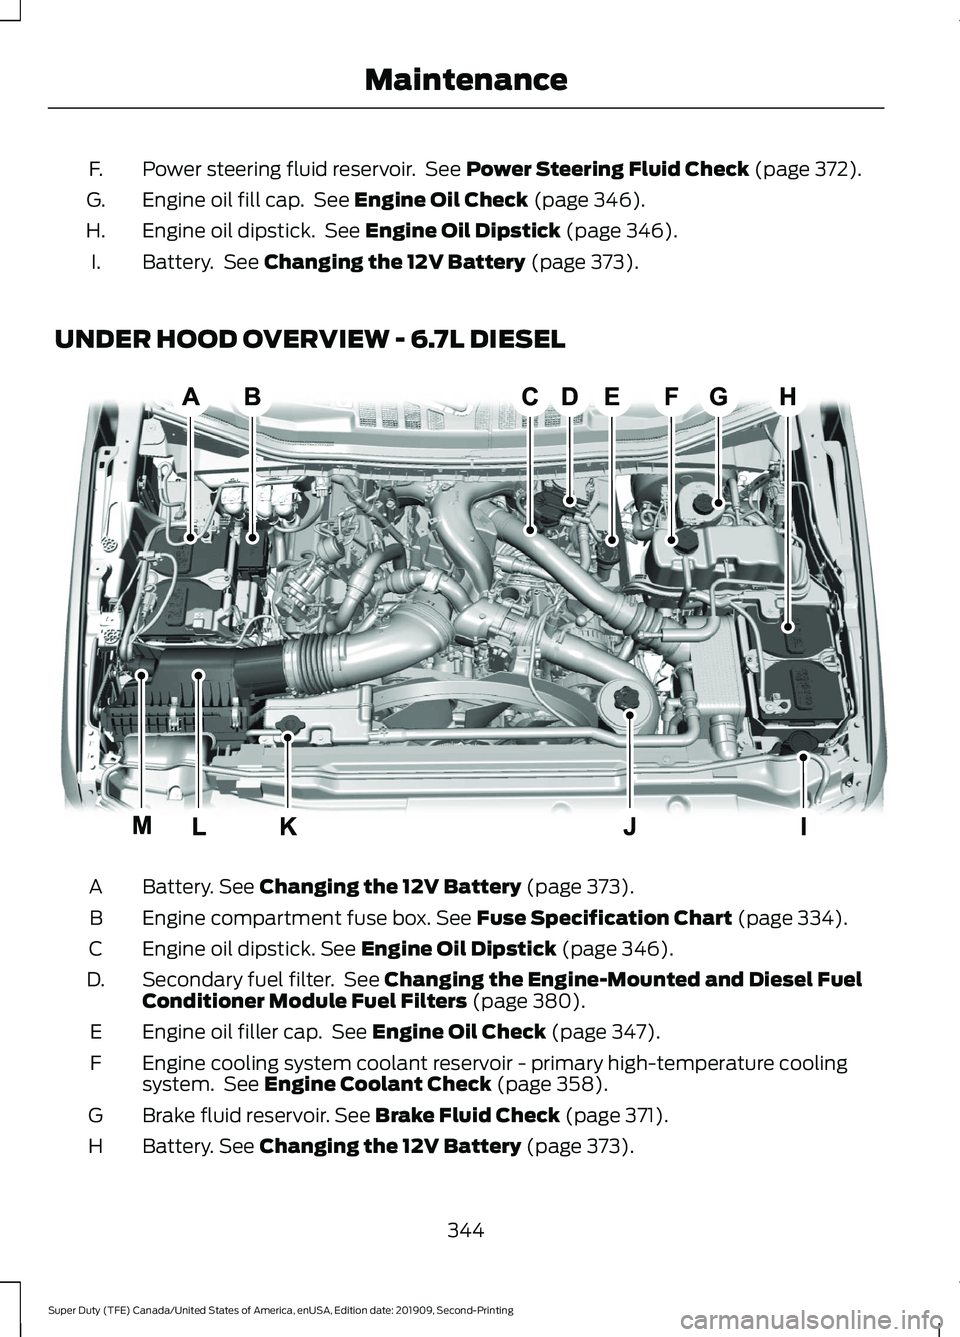 FORD F250 SUPER DUTY 2020  Owners Manual Power steering fluid reservoir.  See Power Steering Fluid Check (page 372).
F.
Engine oil fill cap.  See 
Engine Oil Check (page 346).
G.
Engine oil dipstick.  See 
Engine Oil Dipstick (page 346).
H.
